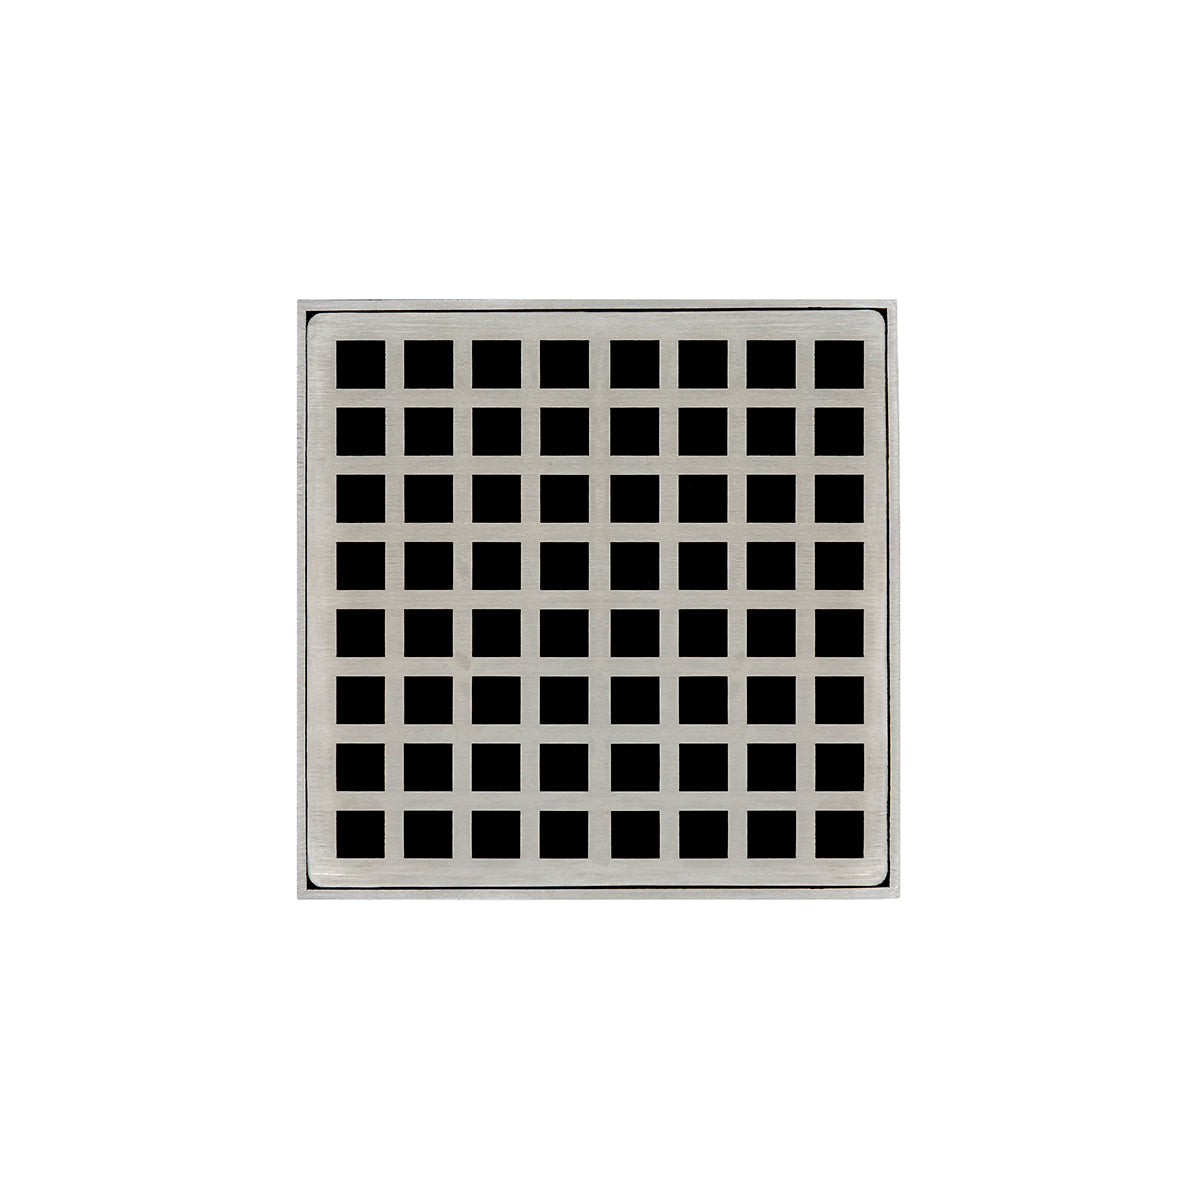 Infinity Drain 5" x 5" QDB 5 Premium Center Drain Kit with Squares Pattern Decorative Plate with Stainless Steel Bonded Flange Drain Body, 2" No Hub Outlet